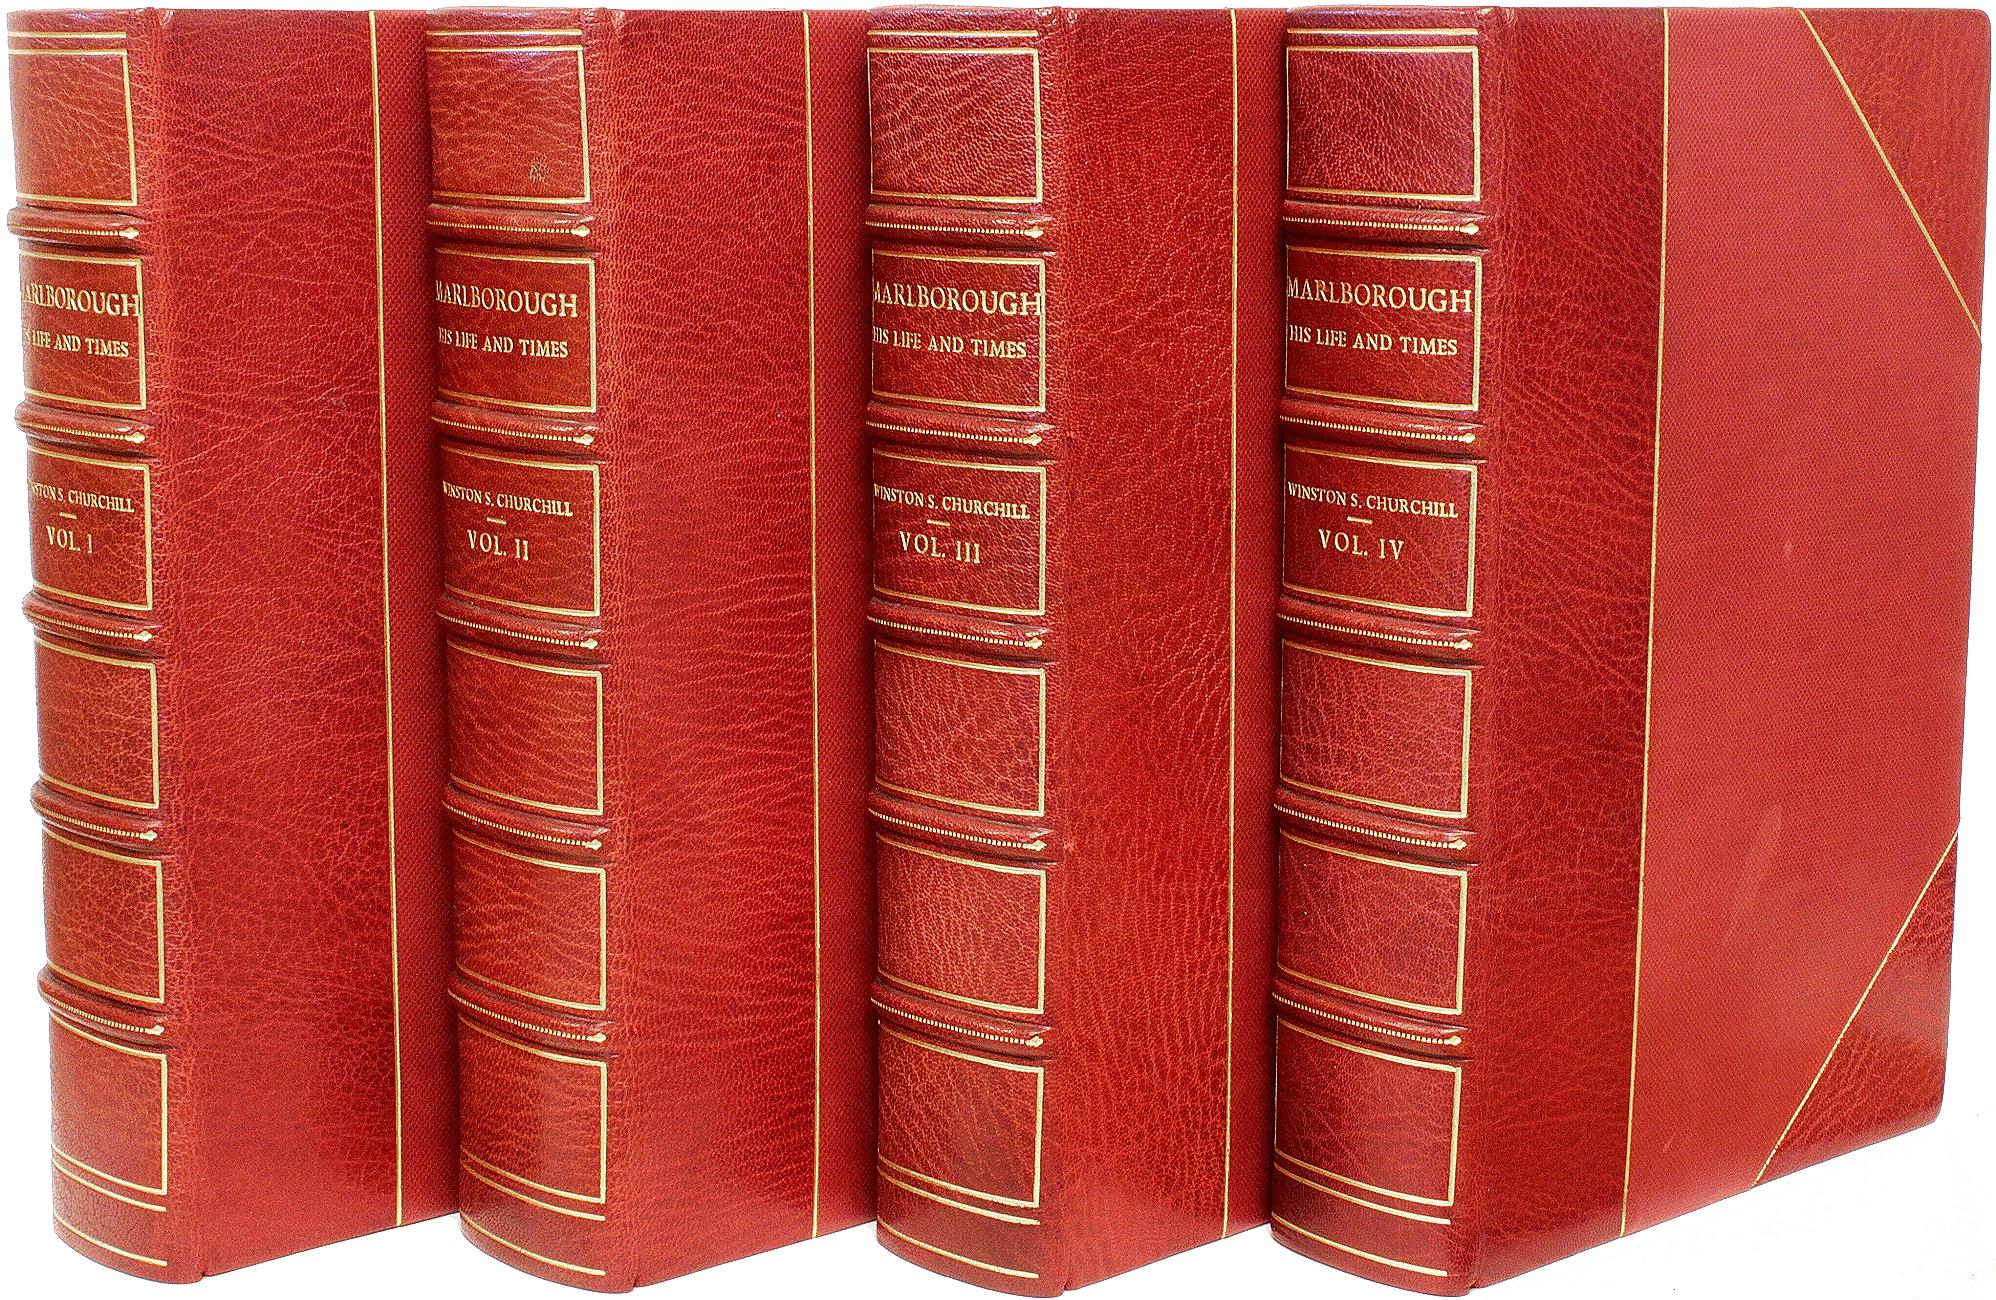 AUTHOR: CHURCHILL, Winston S. 

TITLE: Marlborough His Life and Times.

PUBLISHER: London: George G. Harrap, 1933, 34, 36, 38.

DESCRIPTION: ALL FIRST EDITIONS. 4 vols., 9-1/16